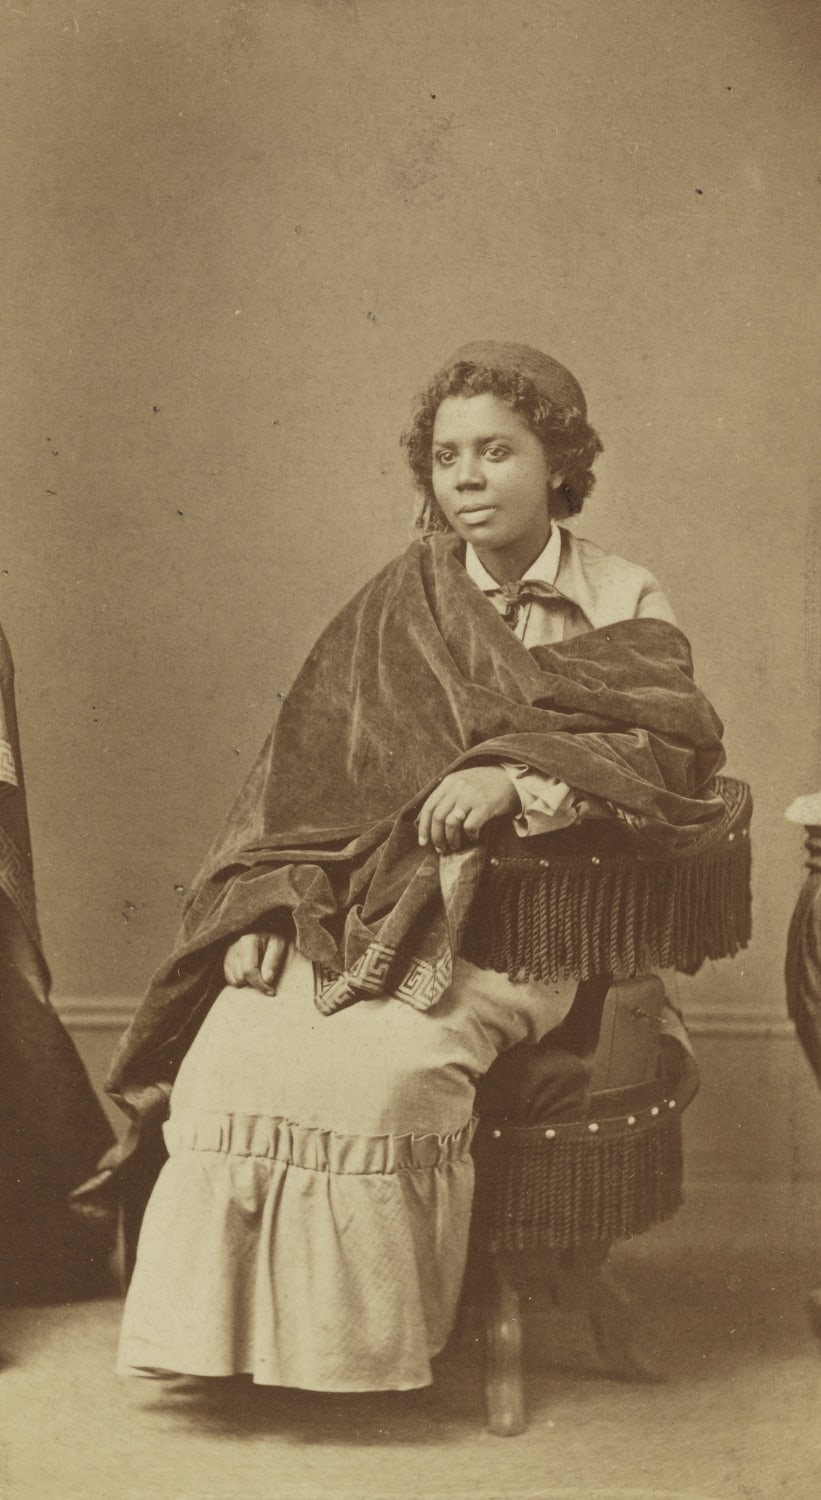 Sculptor Edmonia Lewis Shattered Gender and Race Expectations in 19th-Century America